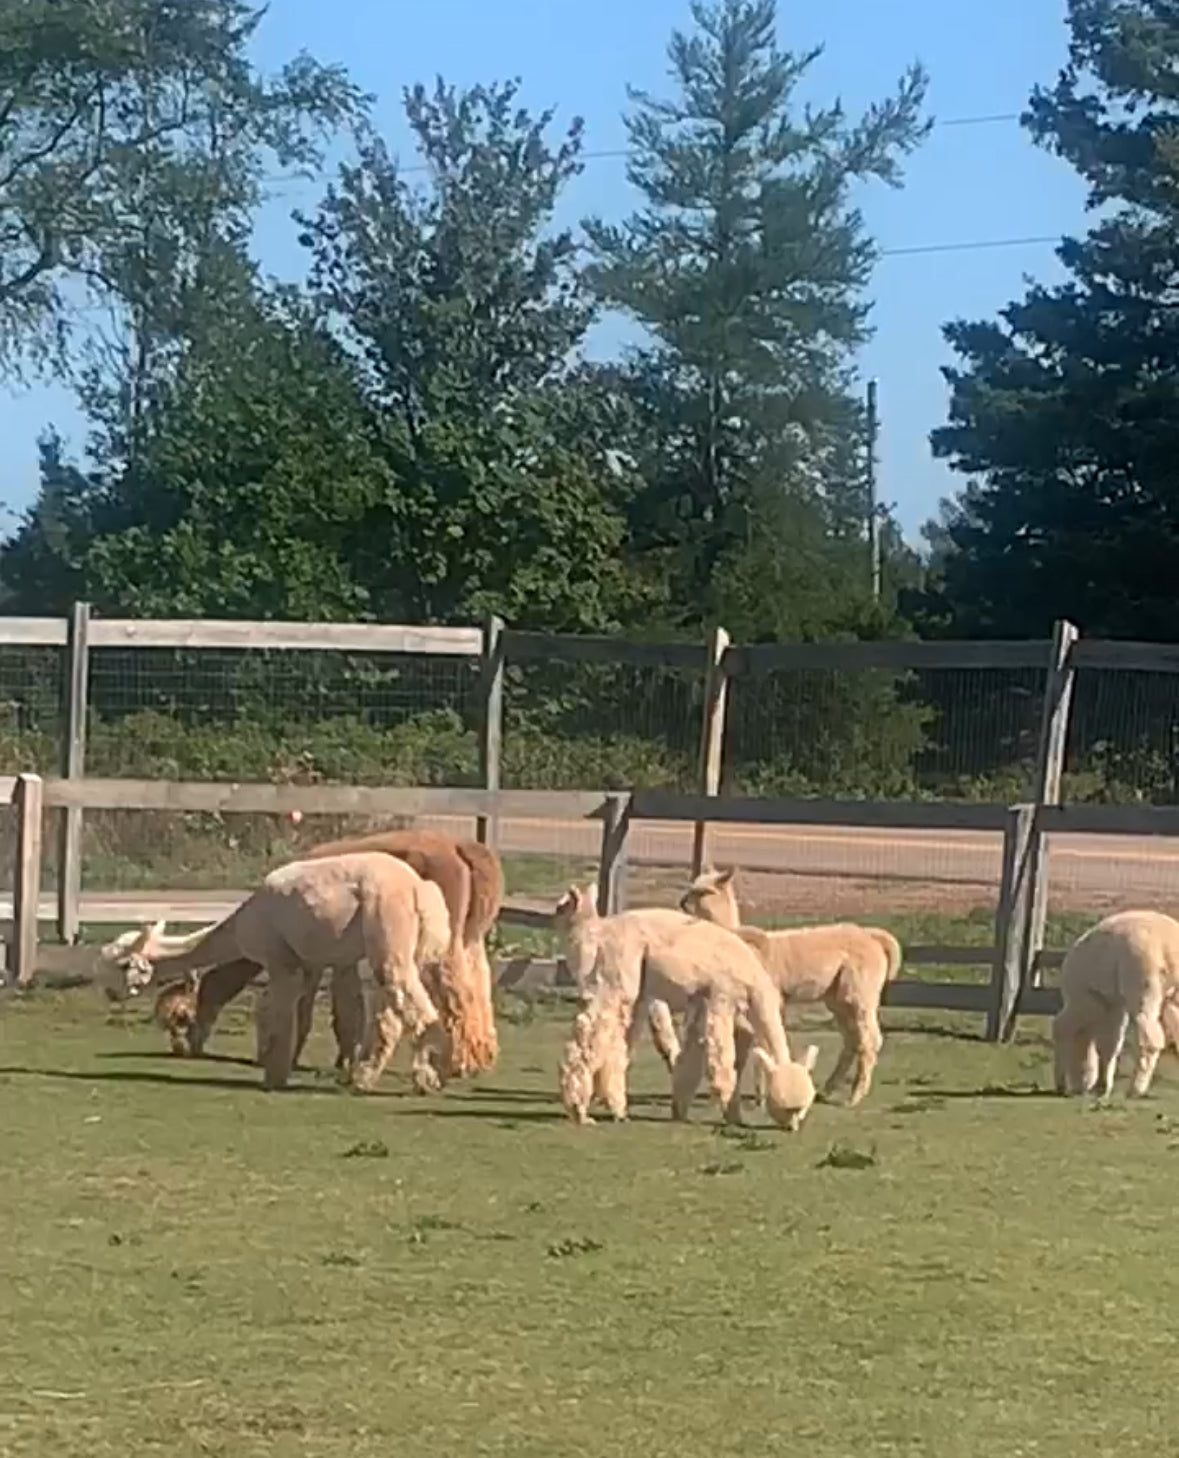 A group of alpacas grazing in the sun.